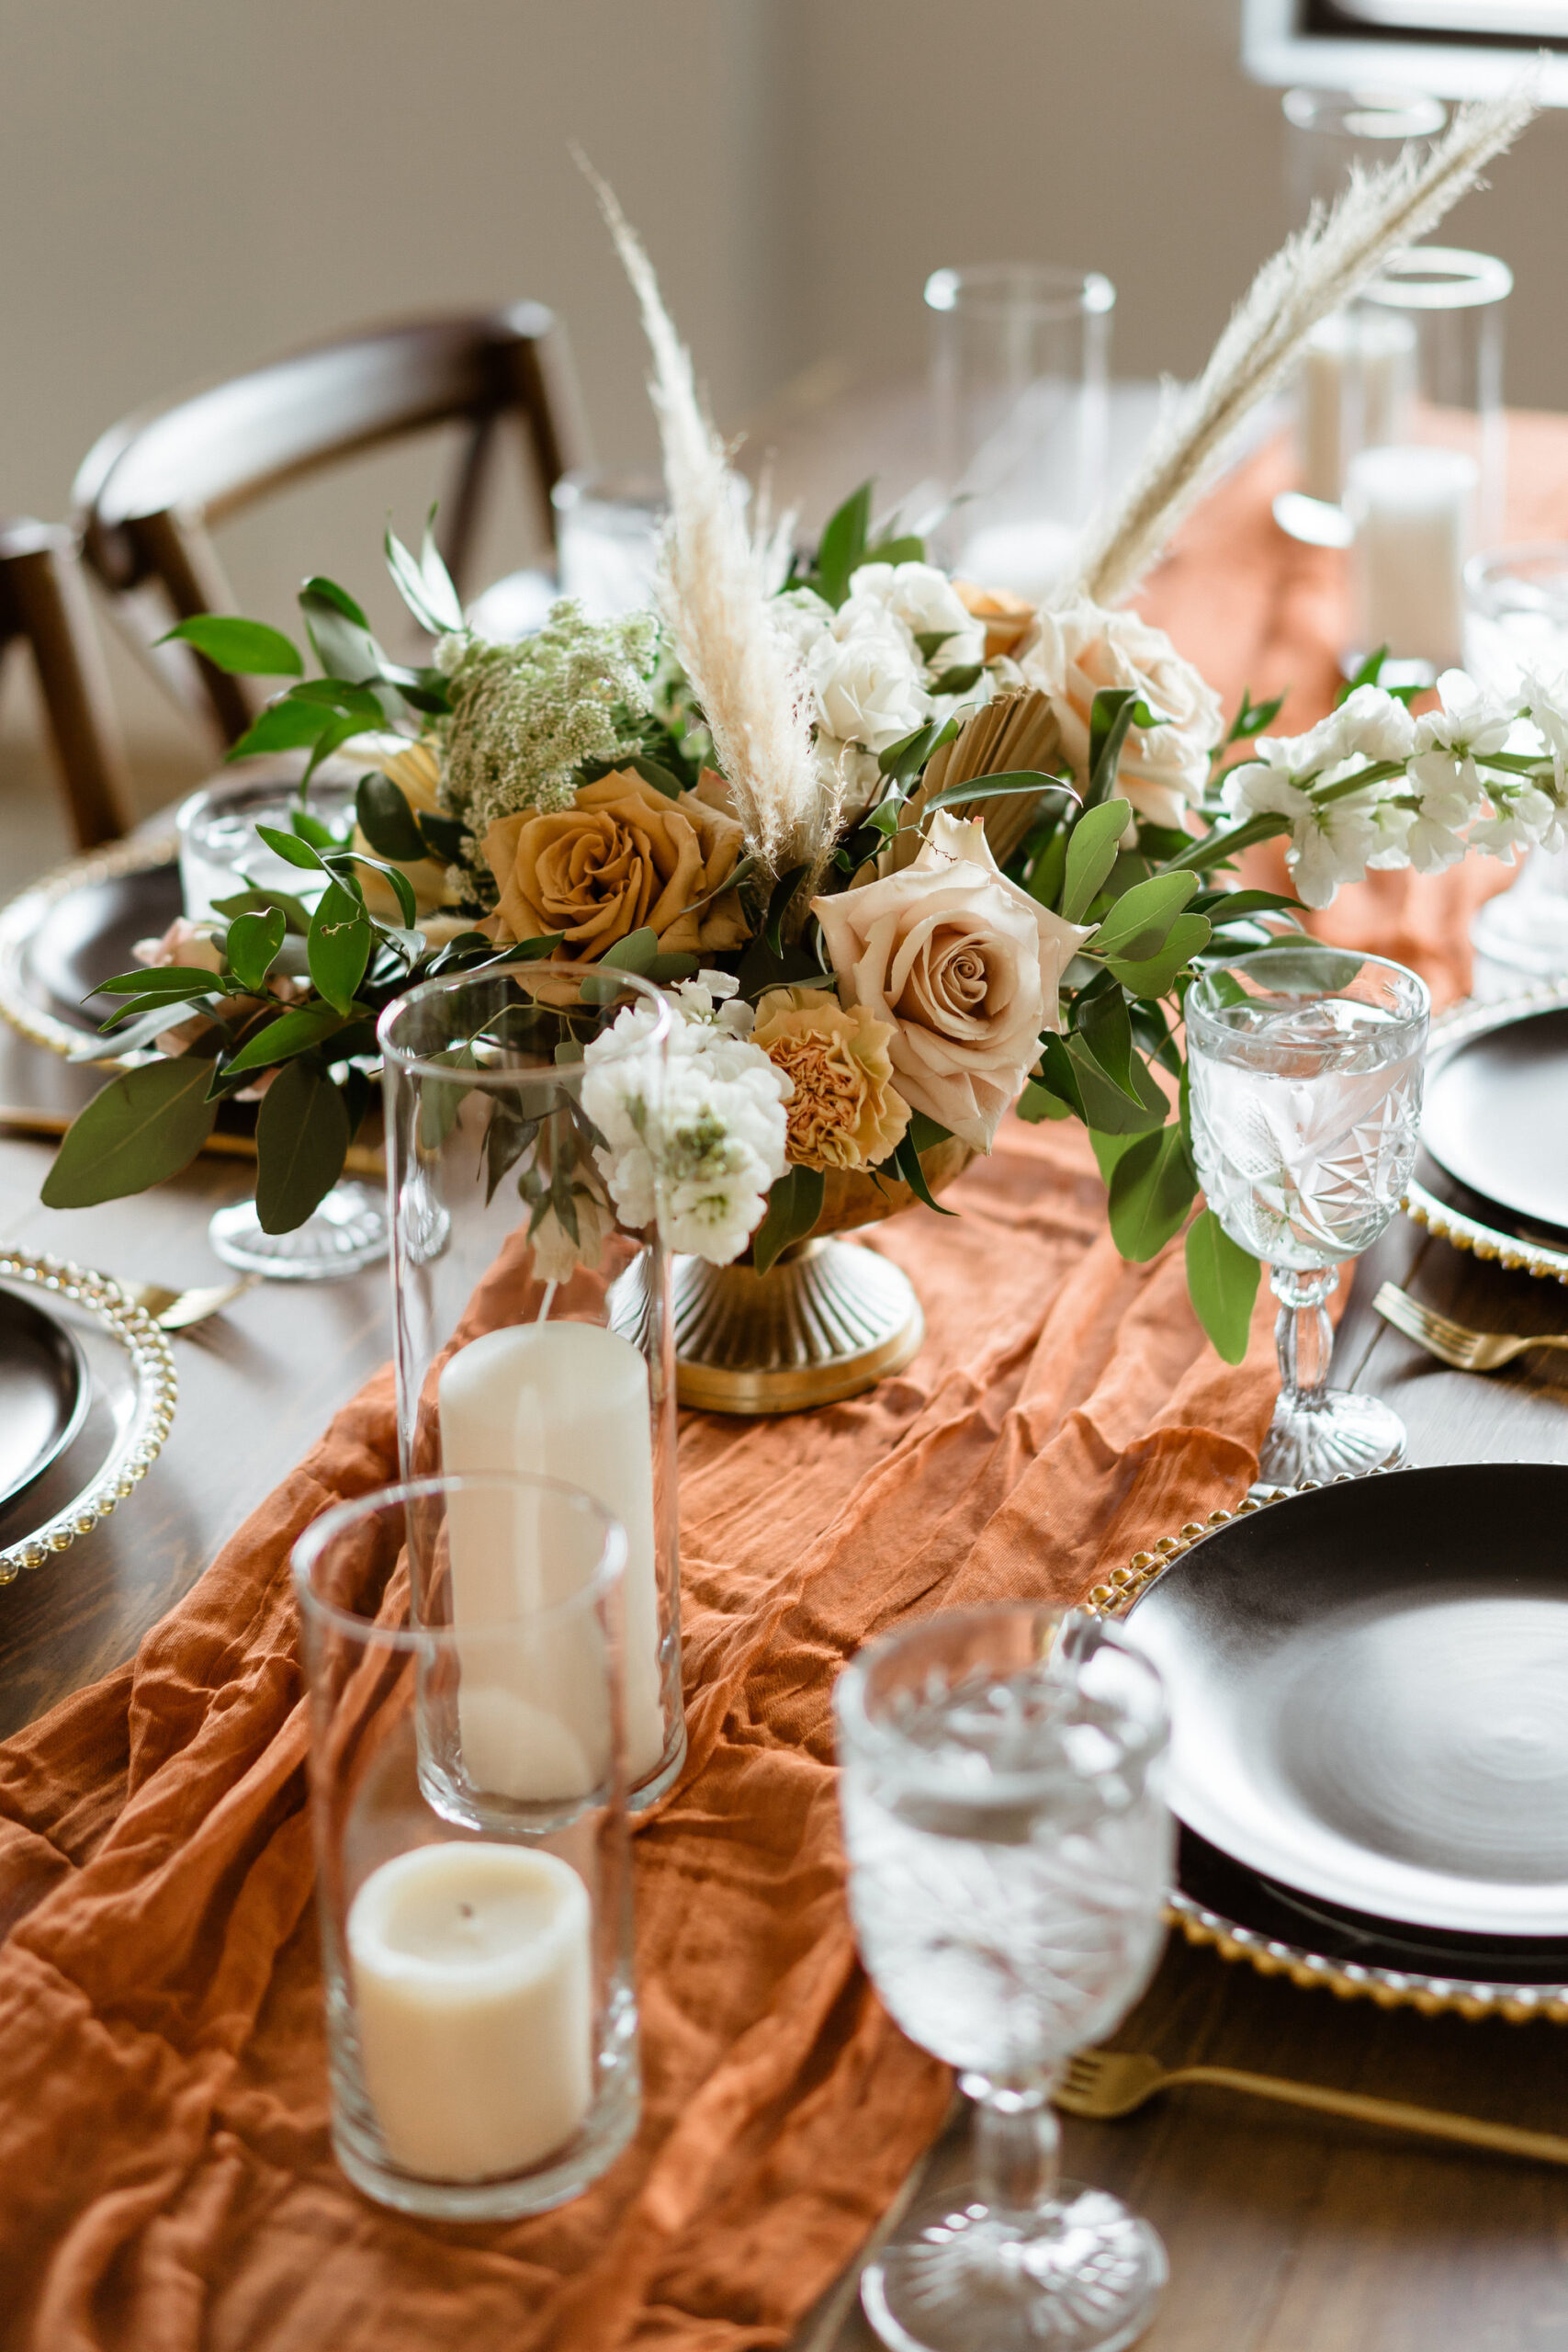 Orange Terracotta Table Runner With Candles and Boho Neutral Floral Wedding Reception Centerpiece Ideas